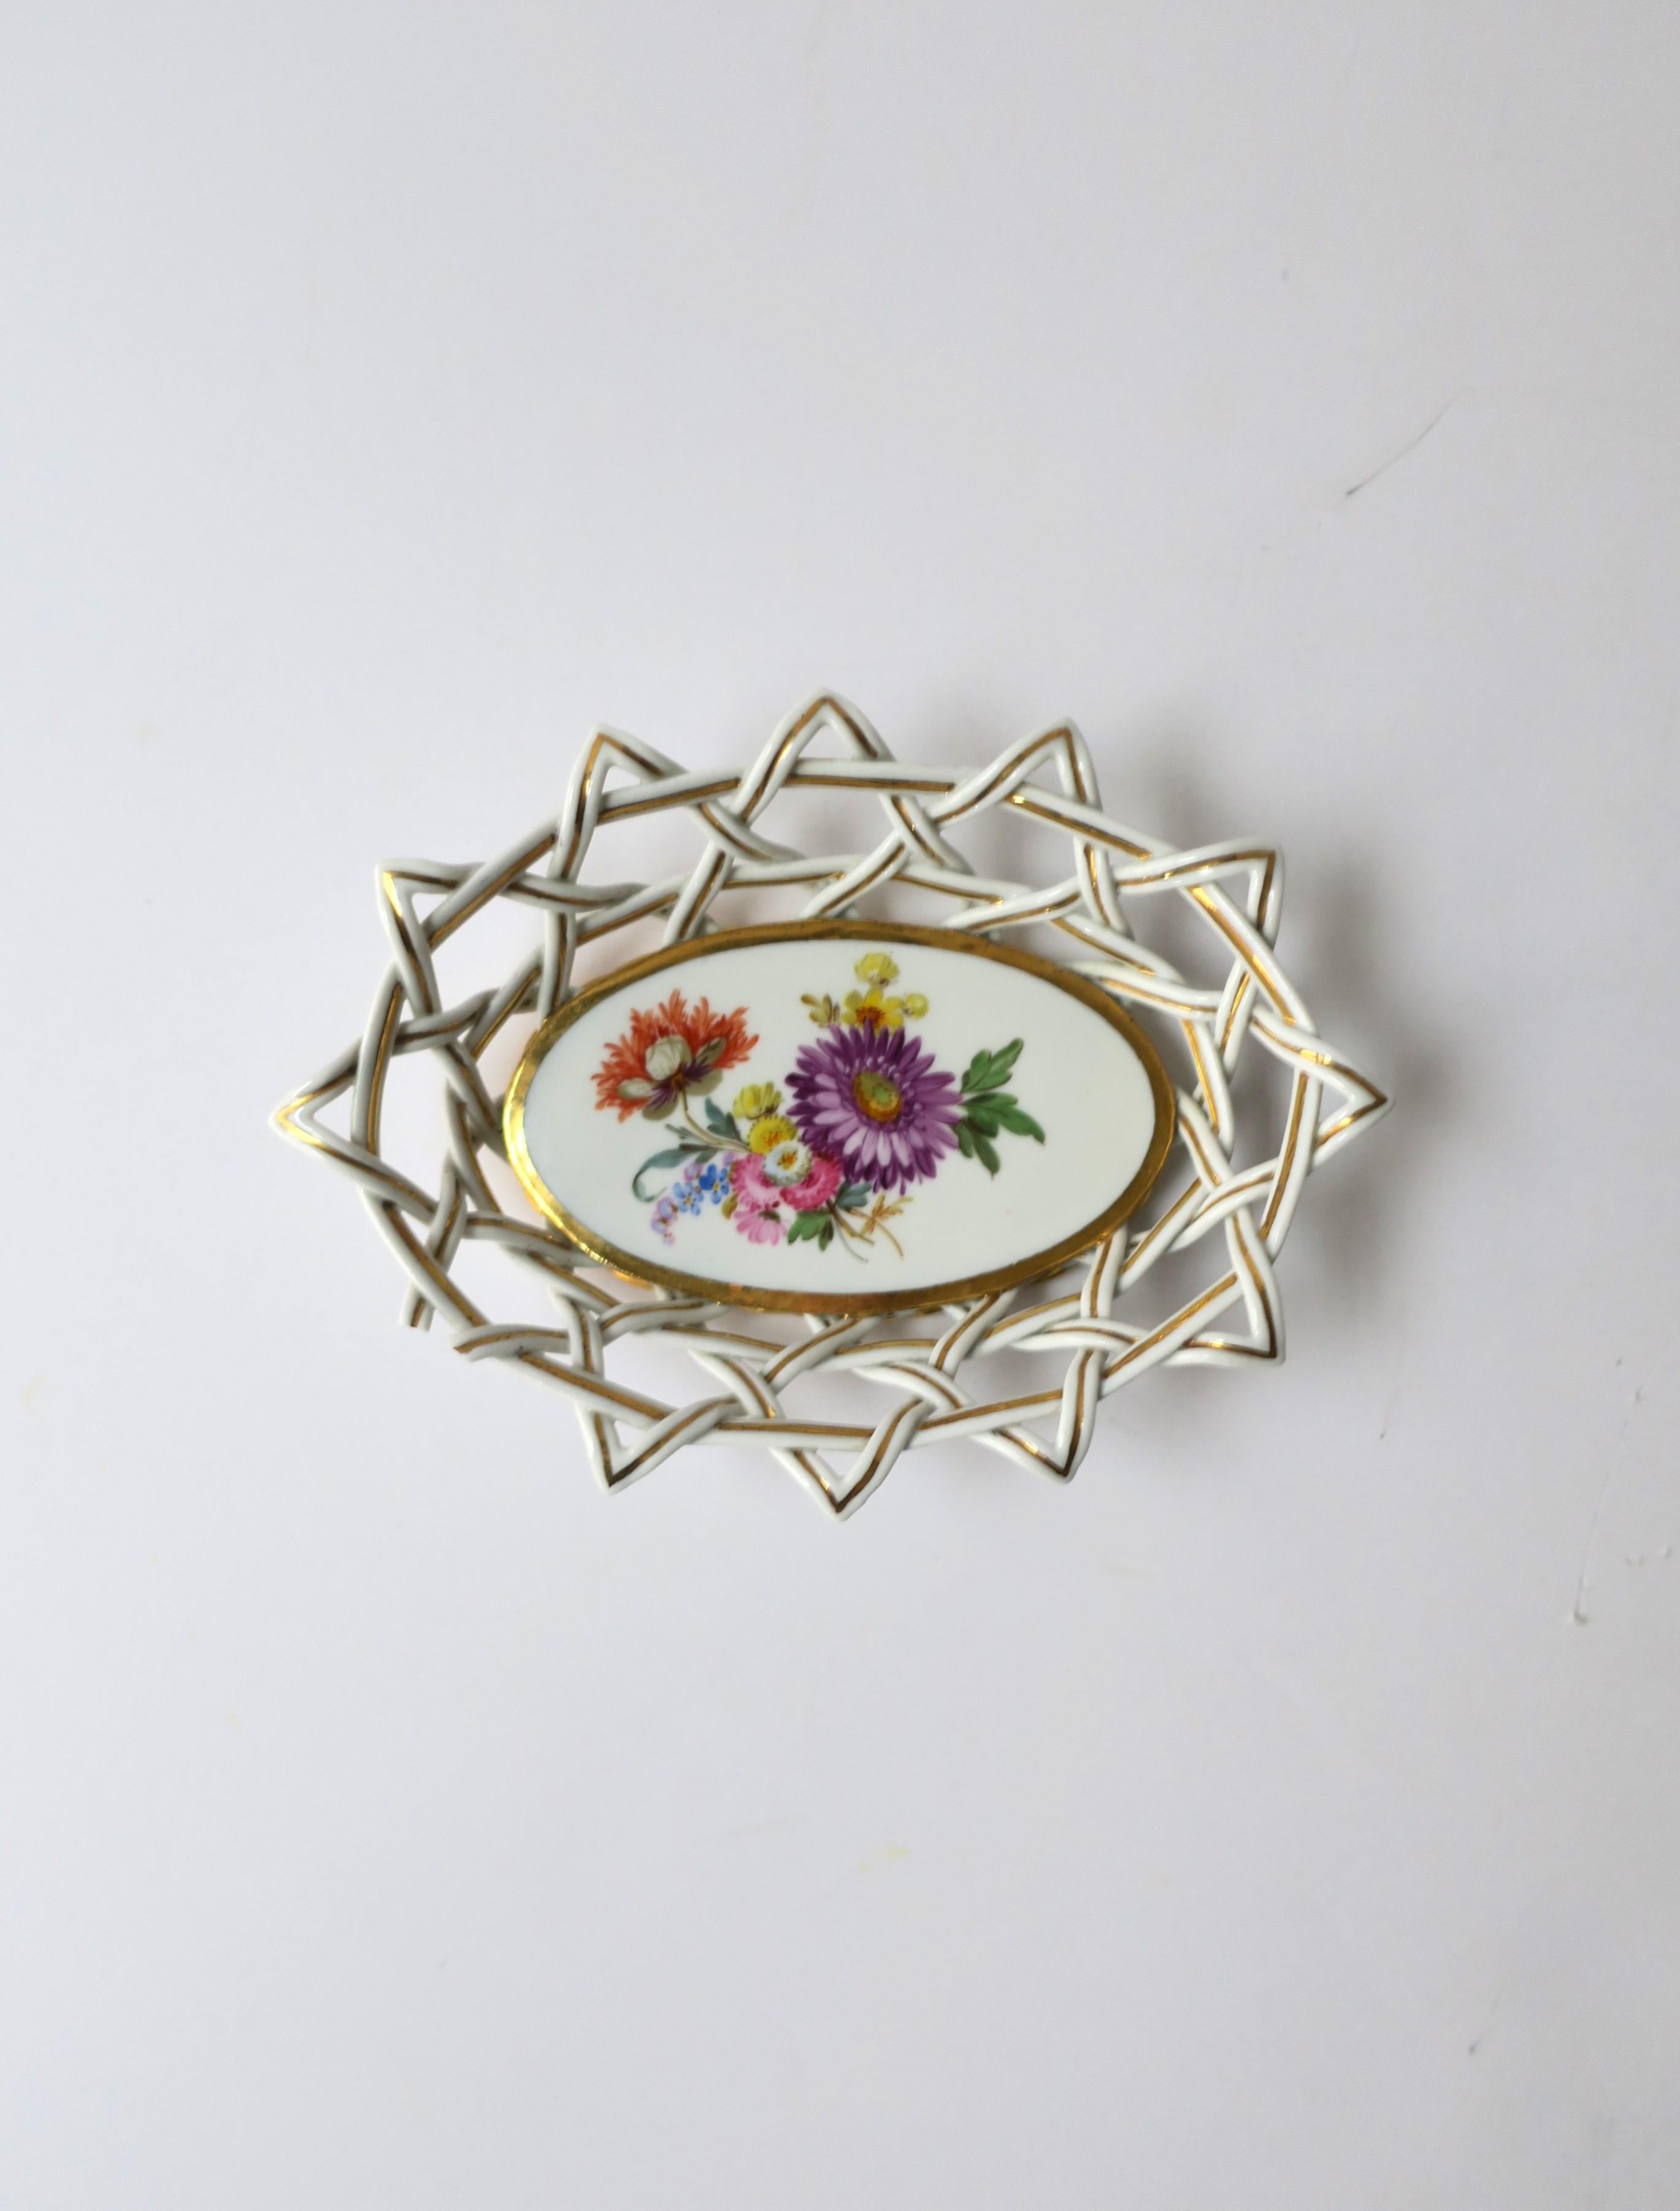 A German Meissen porcelain soap dish with latticework design and floral center, circa 20th century, Germany. This beautiful piece is oval, with lattice work around and gold detail, a multicolored bouquet of flowers at center and thick gold edge, on